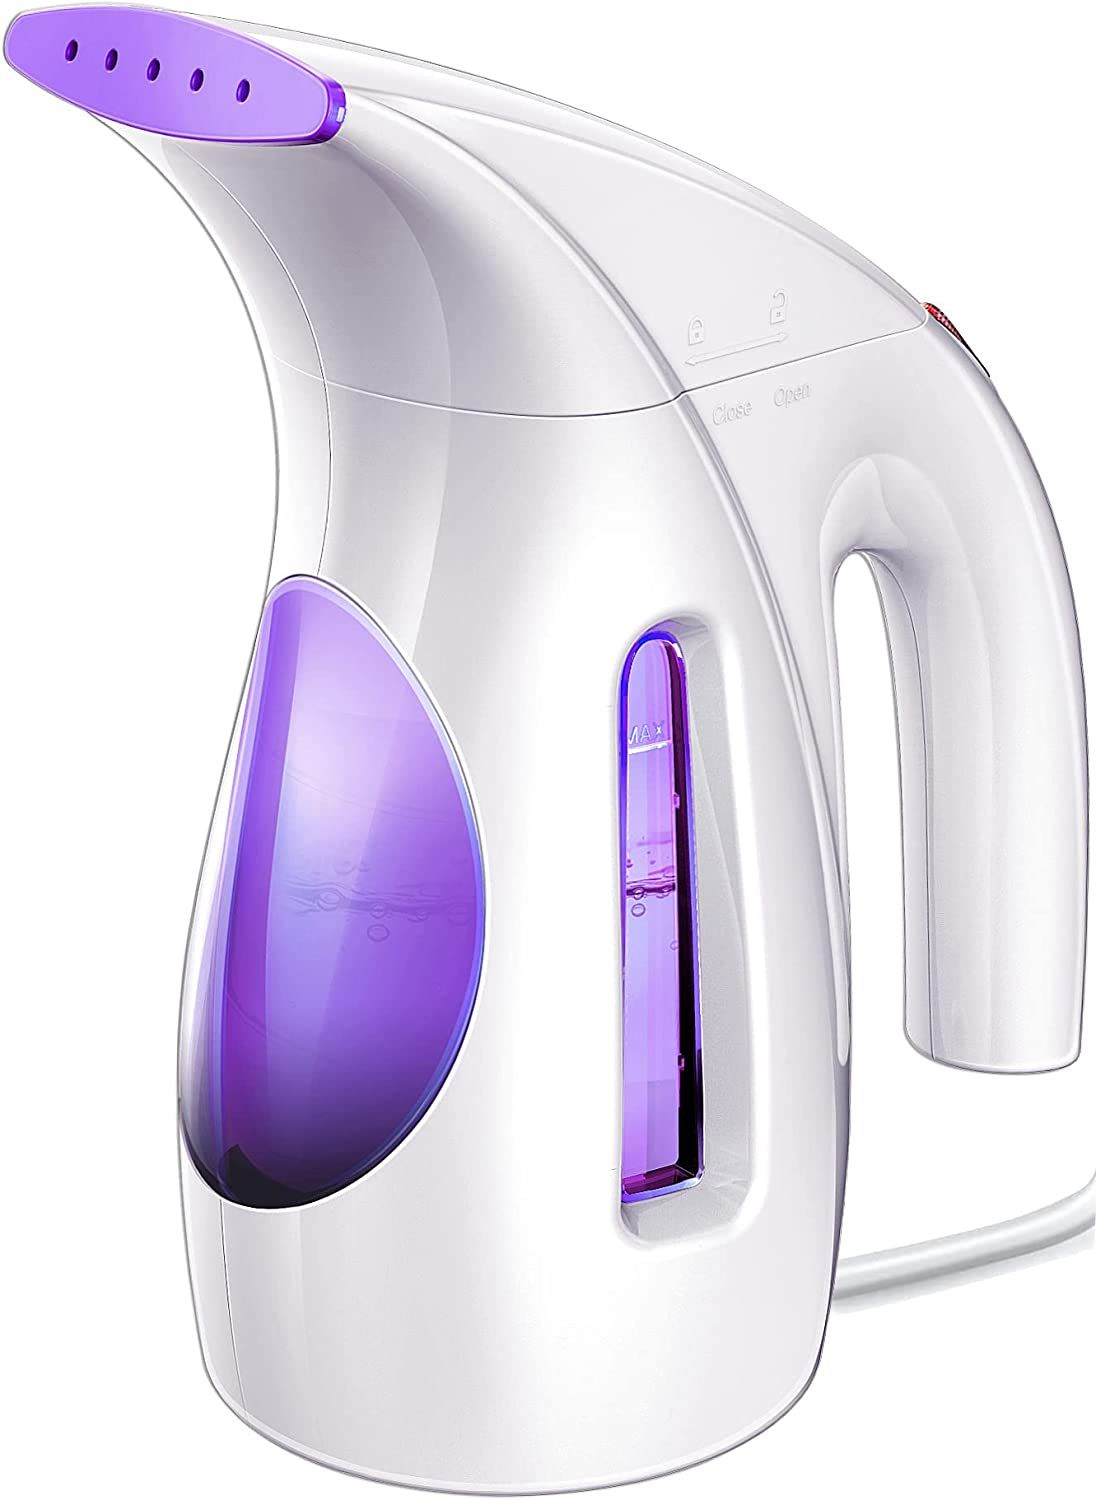 Hilife Steamer for Clothes, Portable Handheld Design, Strong Penetrating Steam Removes Wrinkles, ... | Amazon (US)